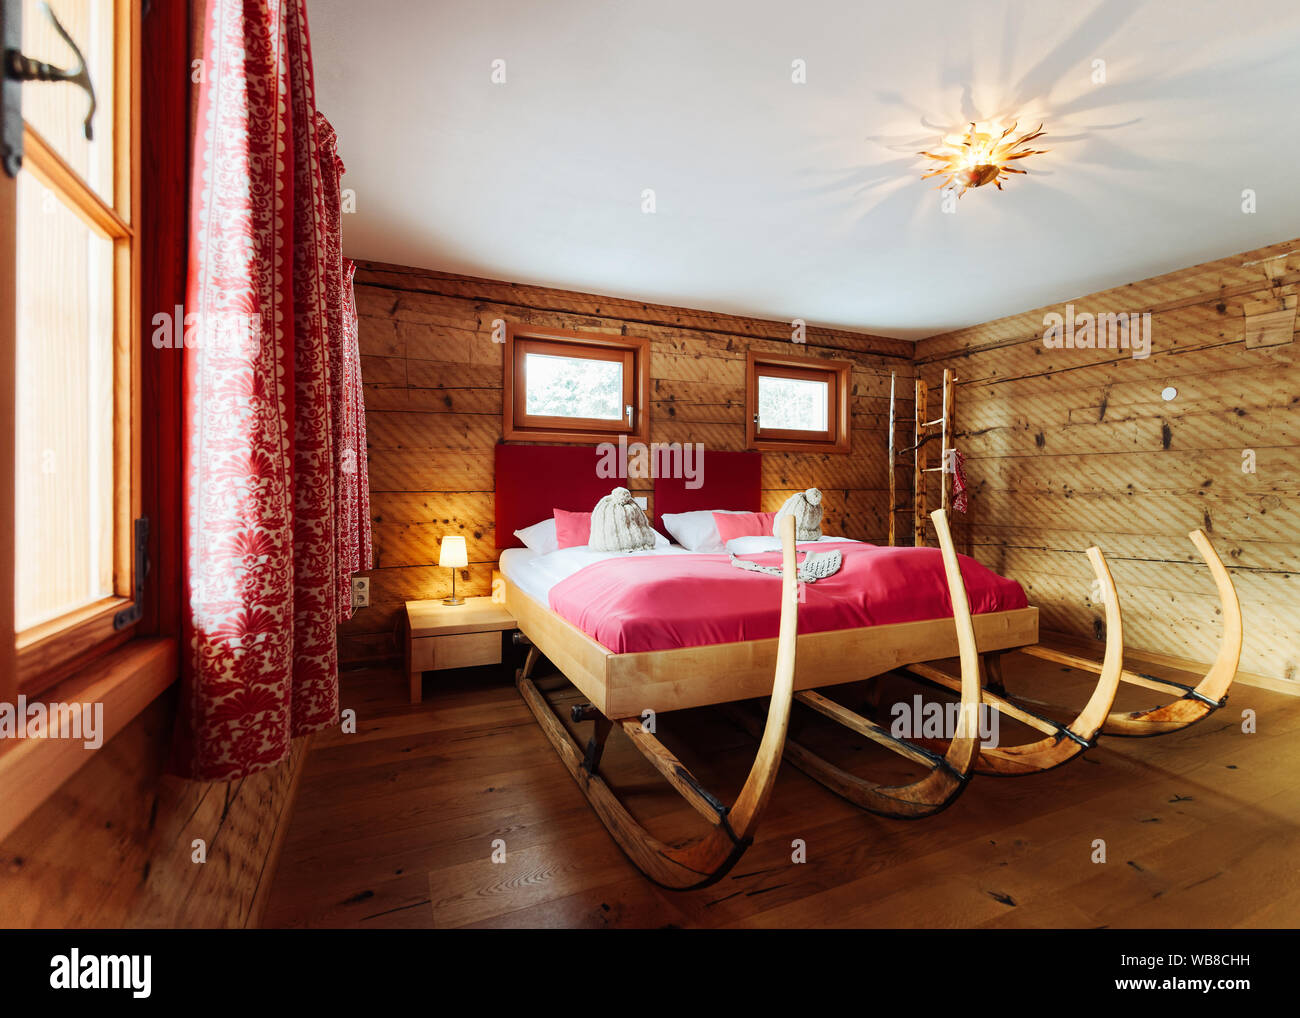 Interior Of Bedroom Modern Design Of Pink Bed Wooden Furniture Of Room Home Decor House Apartment Cozy Style Rustic Vintage And Handicraft Stock Photo Alamy